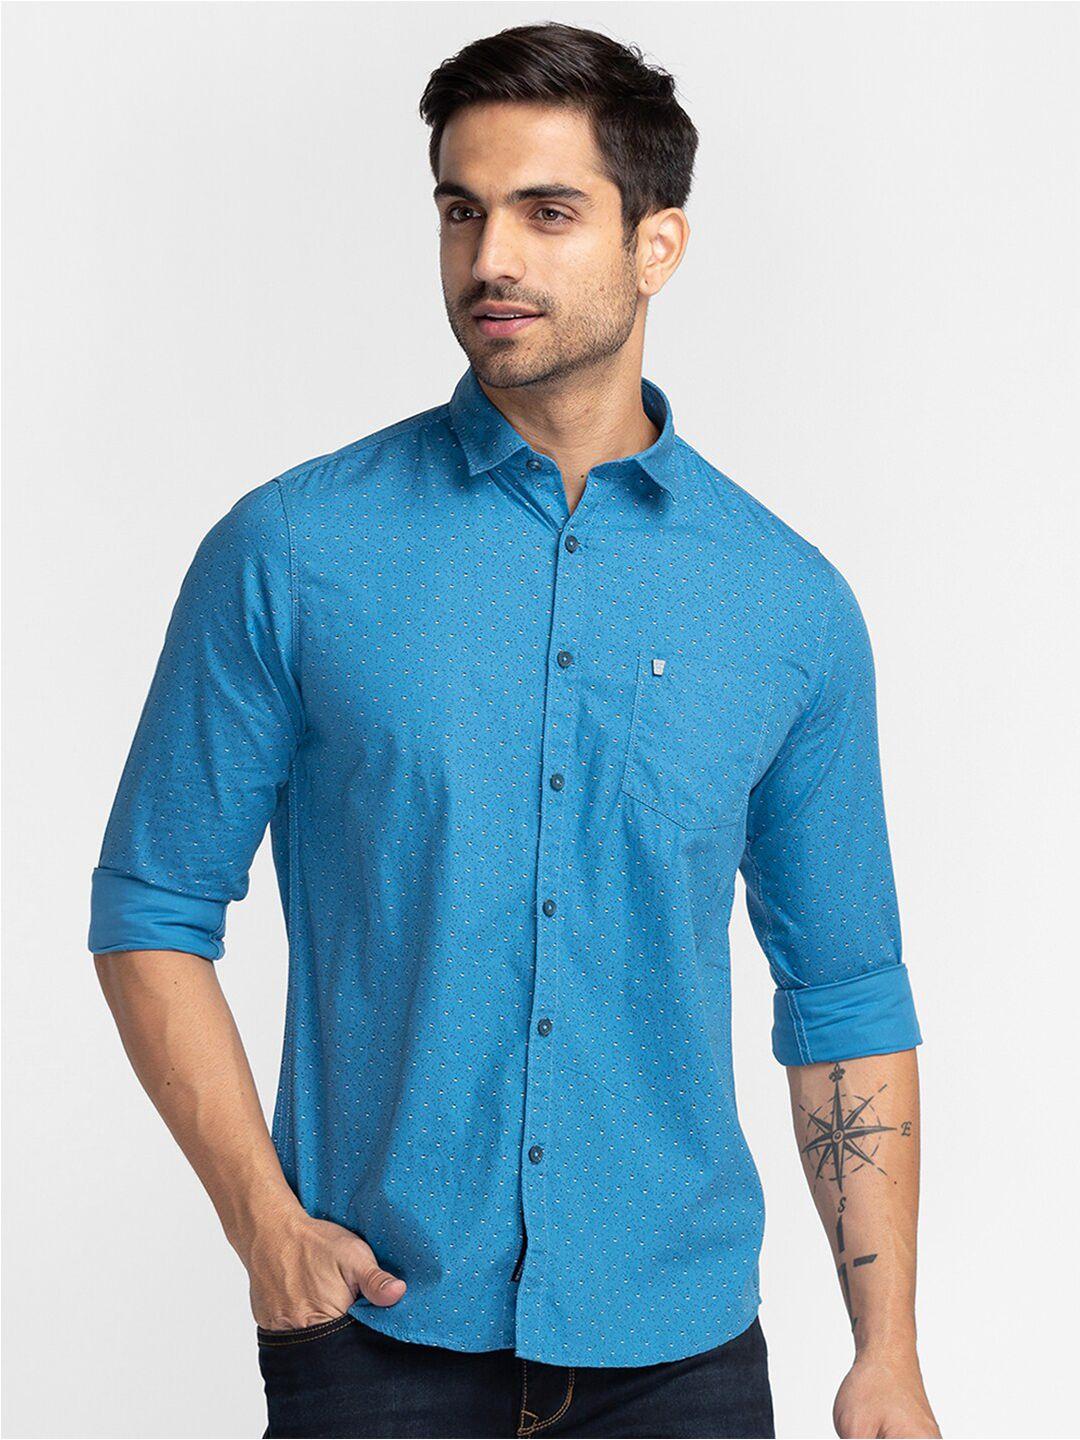 oxemberg men classic slim fit printed cotton casual shirt